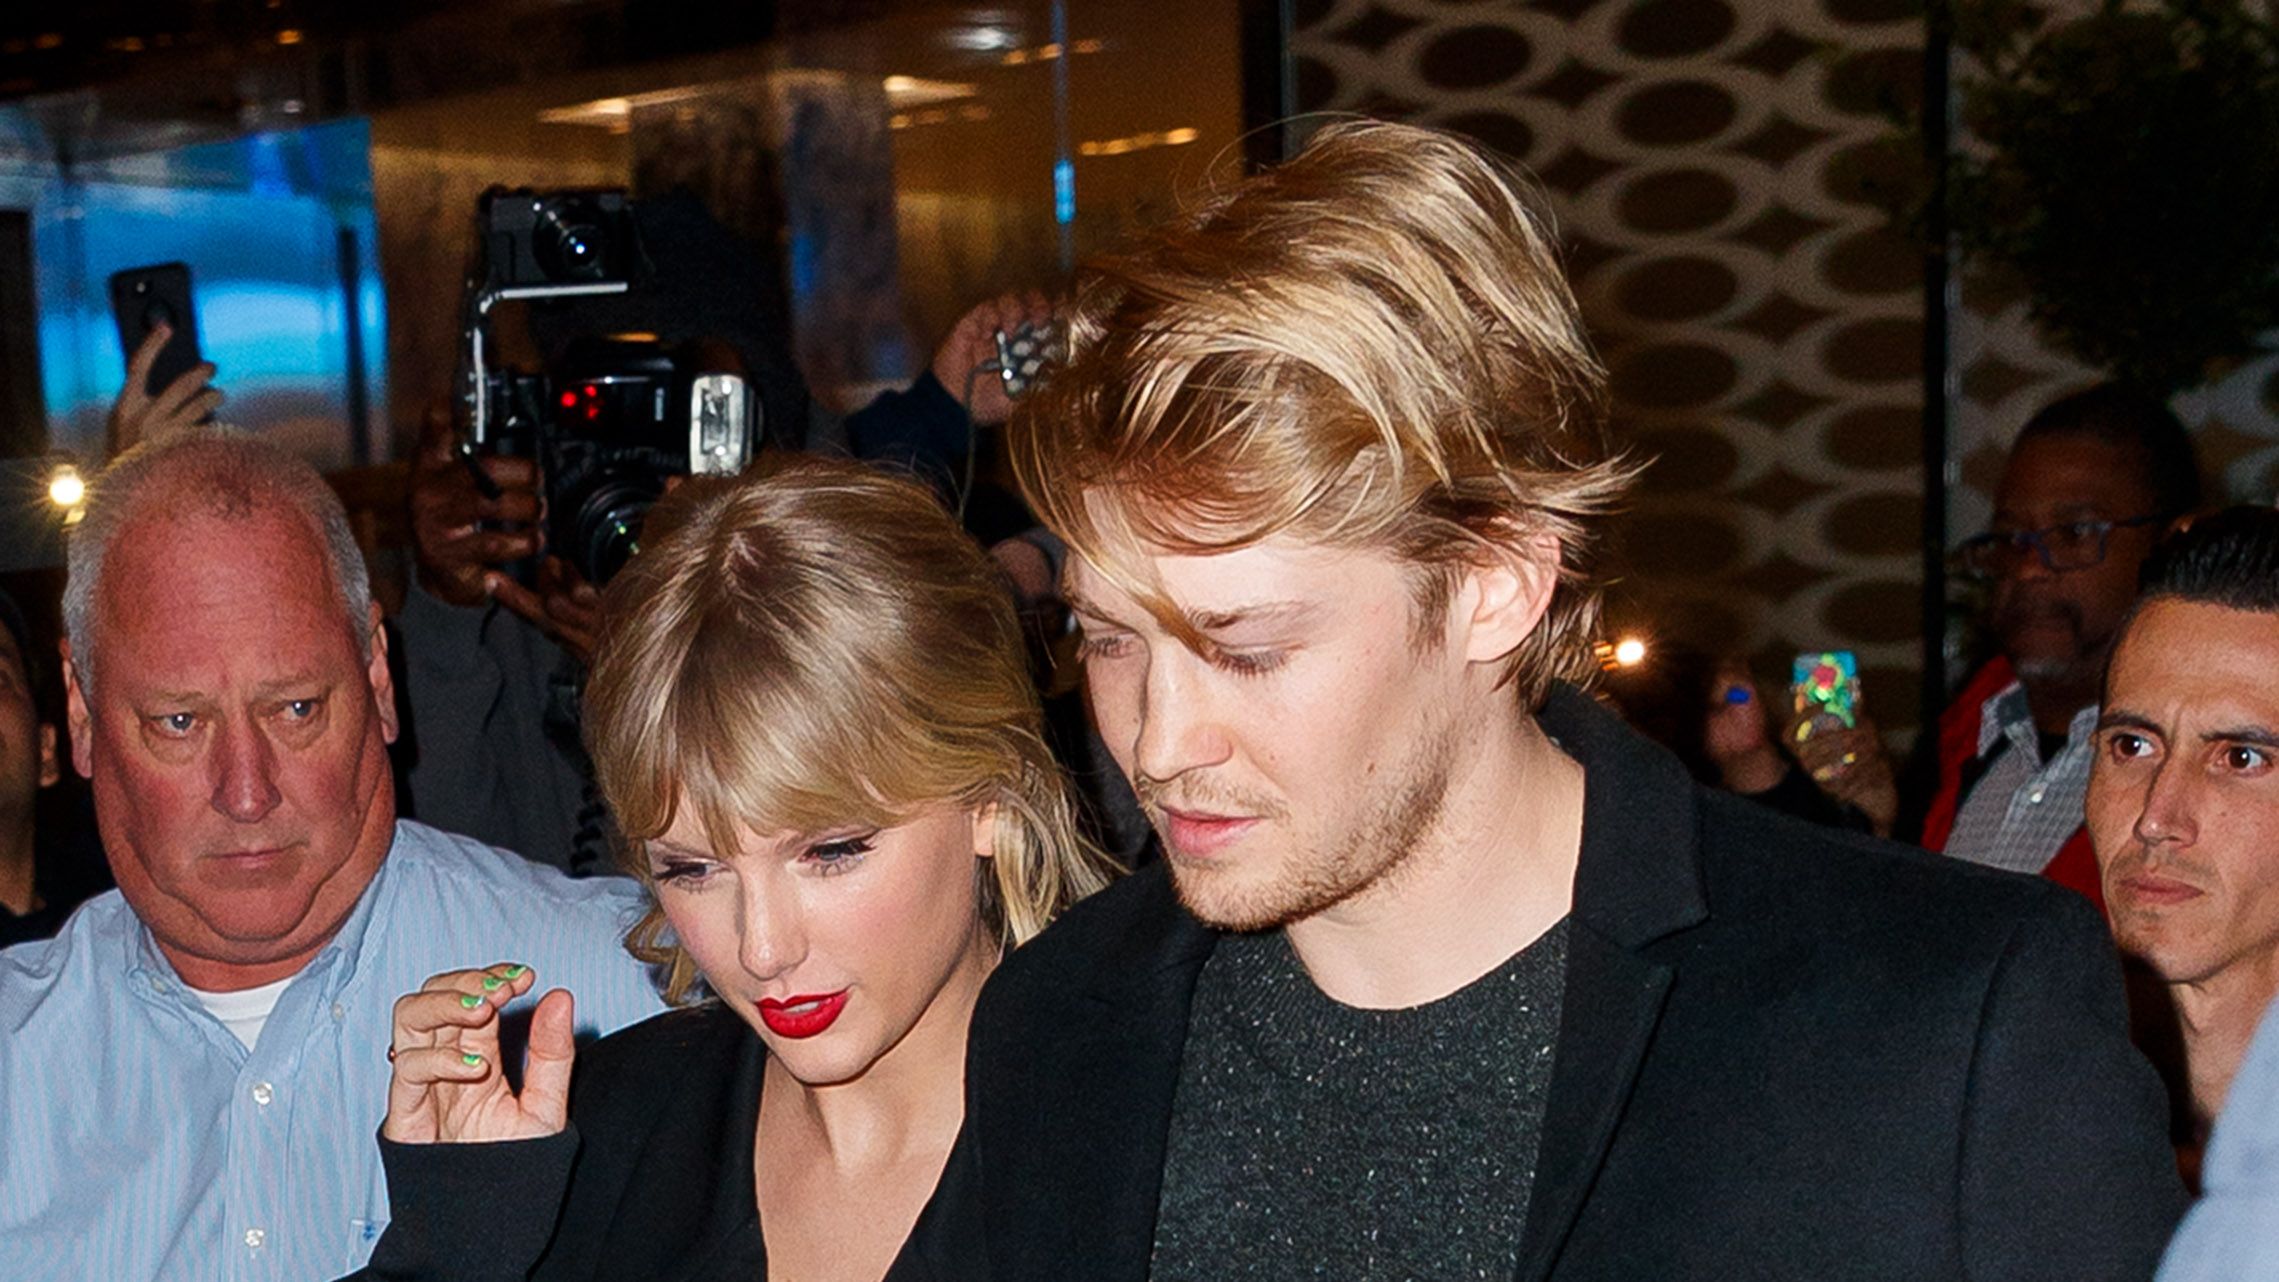 Are Taylor Swift's 'Glitch' Lyrics About Joe Alwyn? - Song Meaning